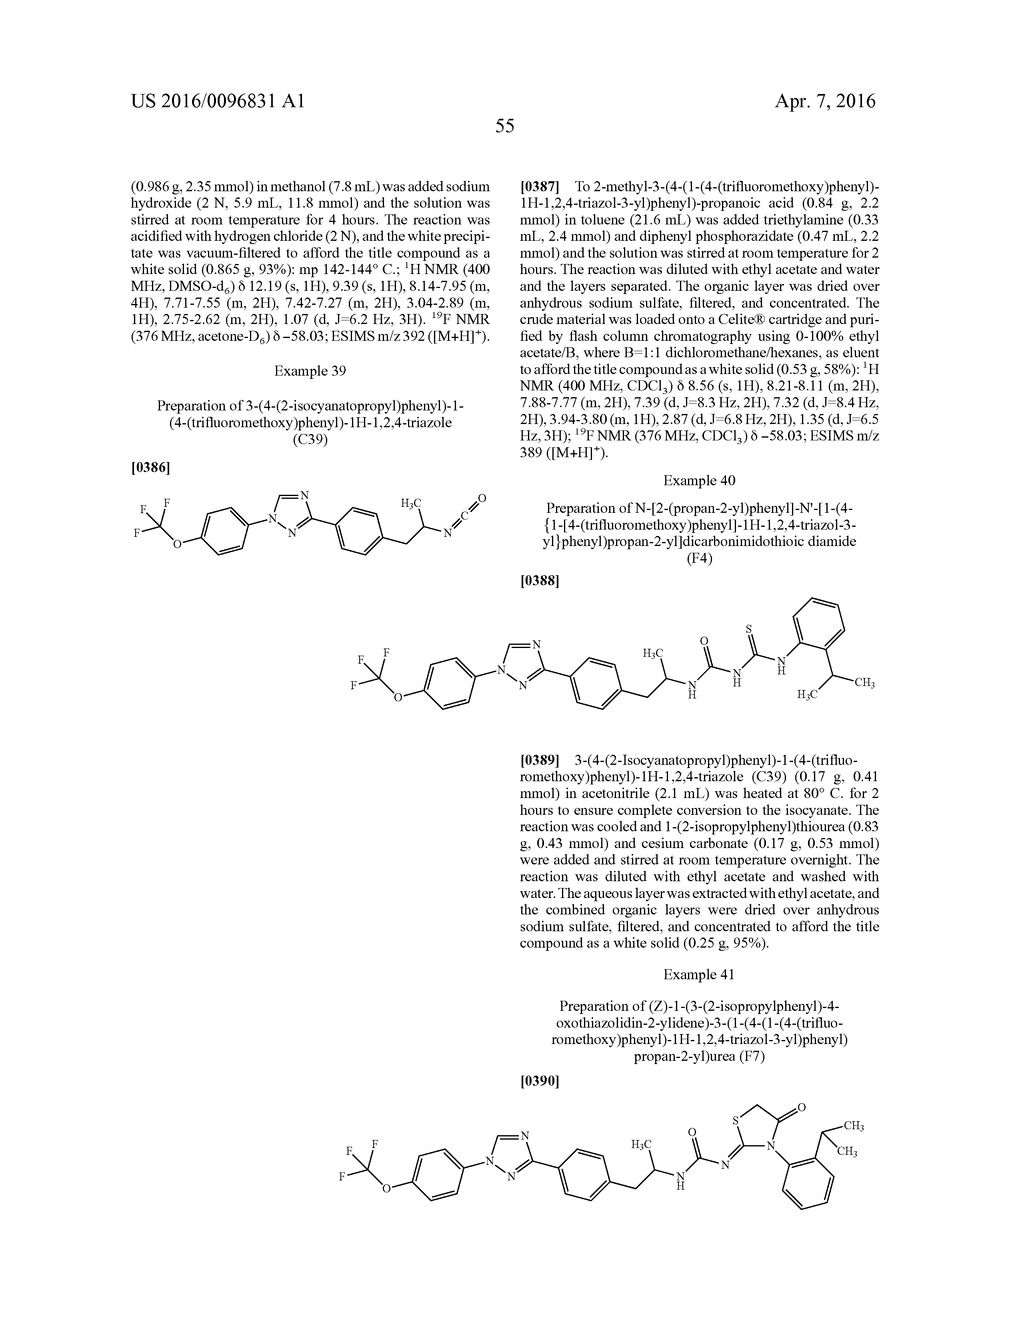 MOLECULES HAVING CERTAIN PESTICIDAL UTILITIES, AND INTERMEDIATES,     COMPOSITIONS, AND PROCESSES RELATED THERETO - diagram, schematic, and image 56